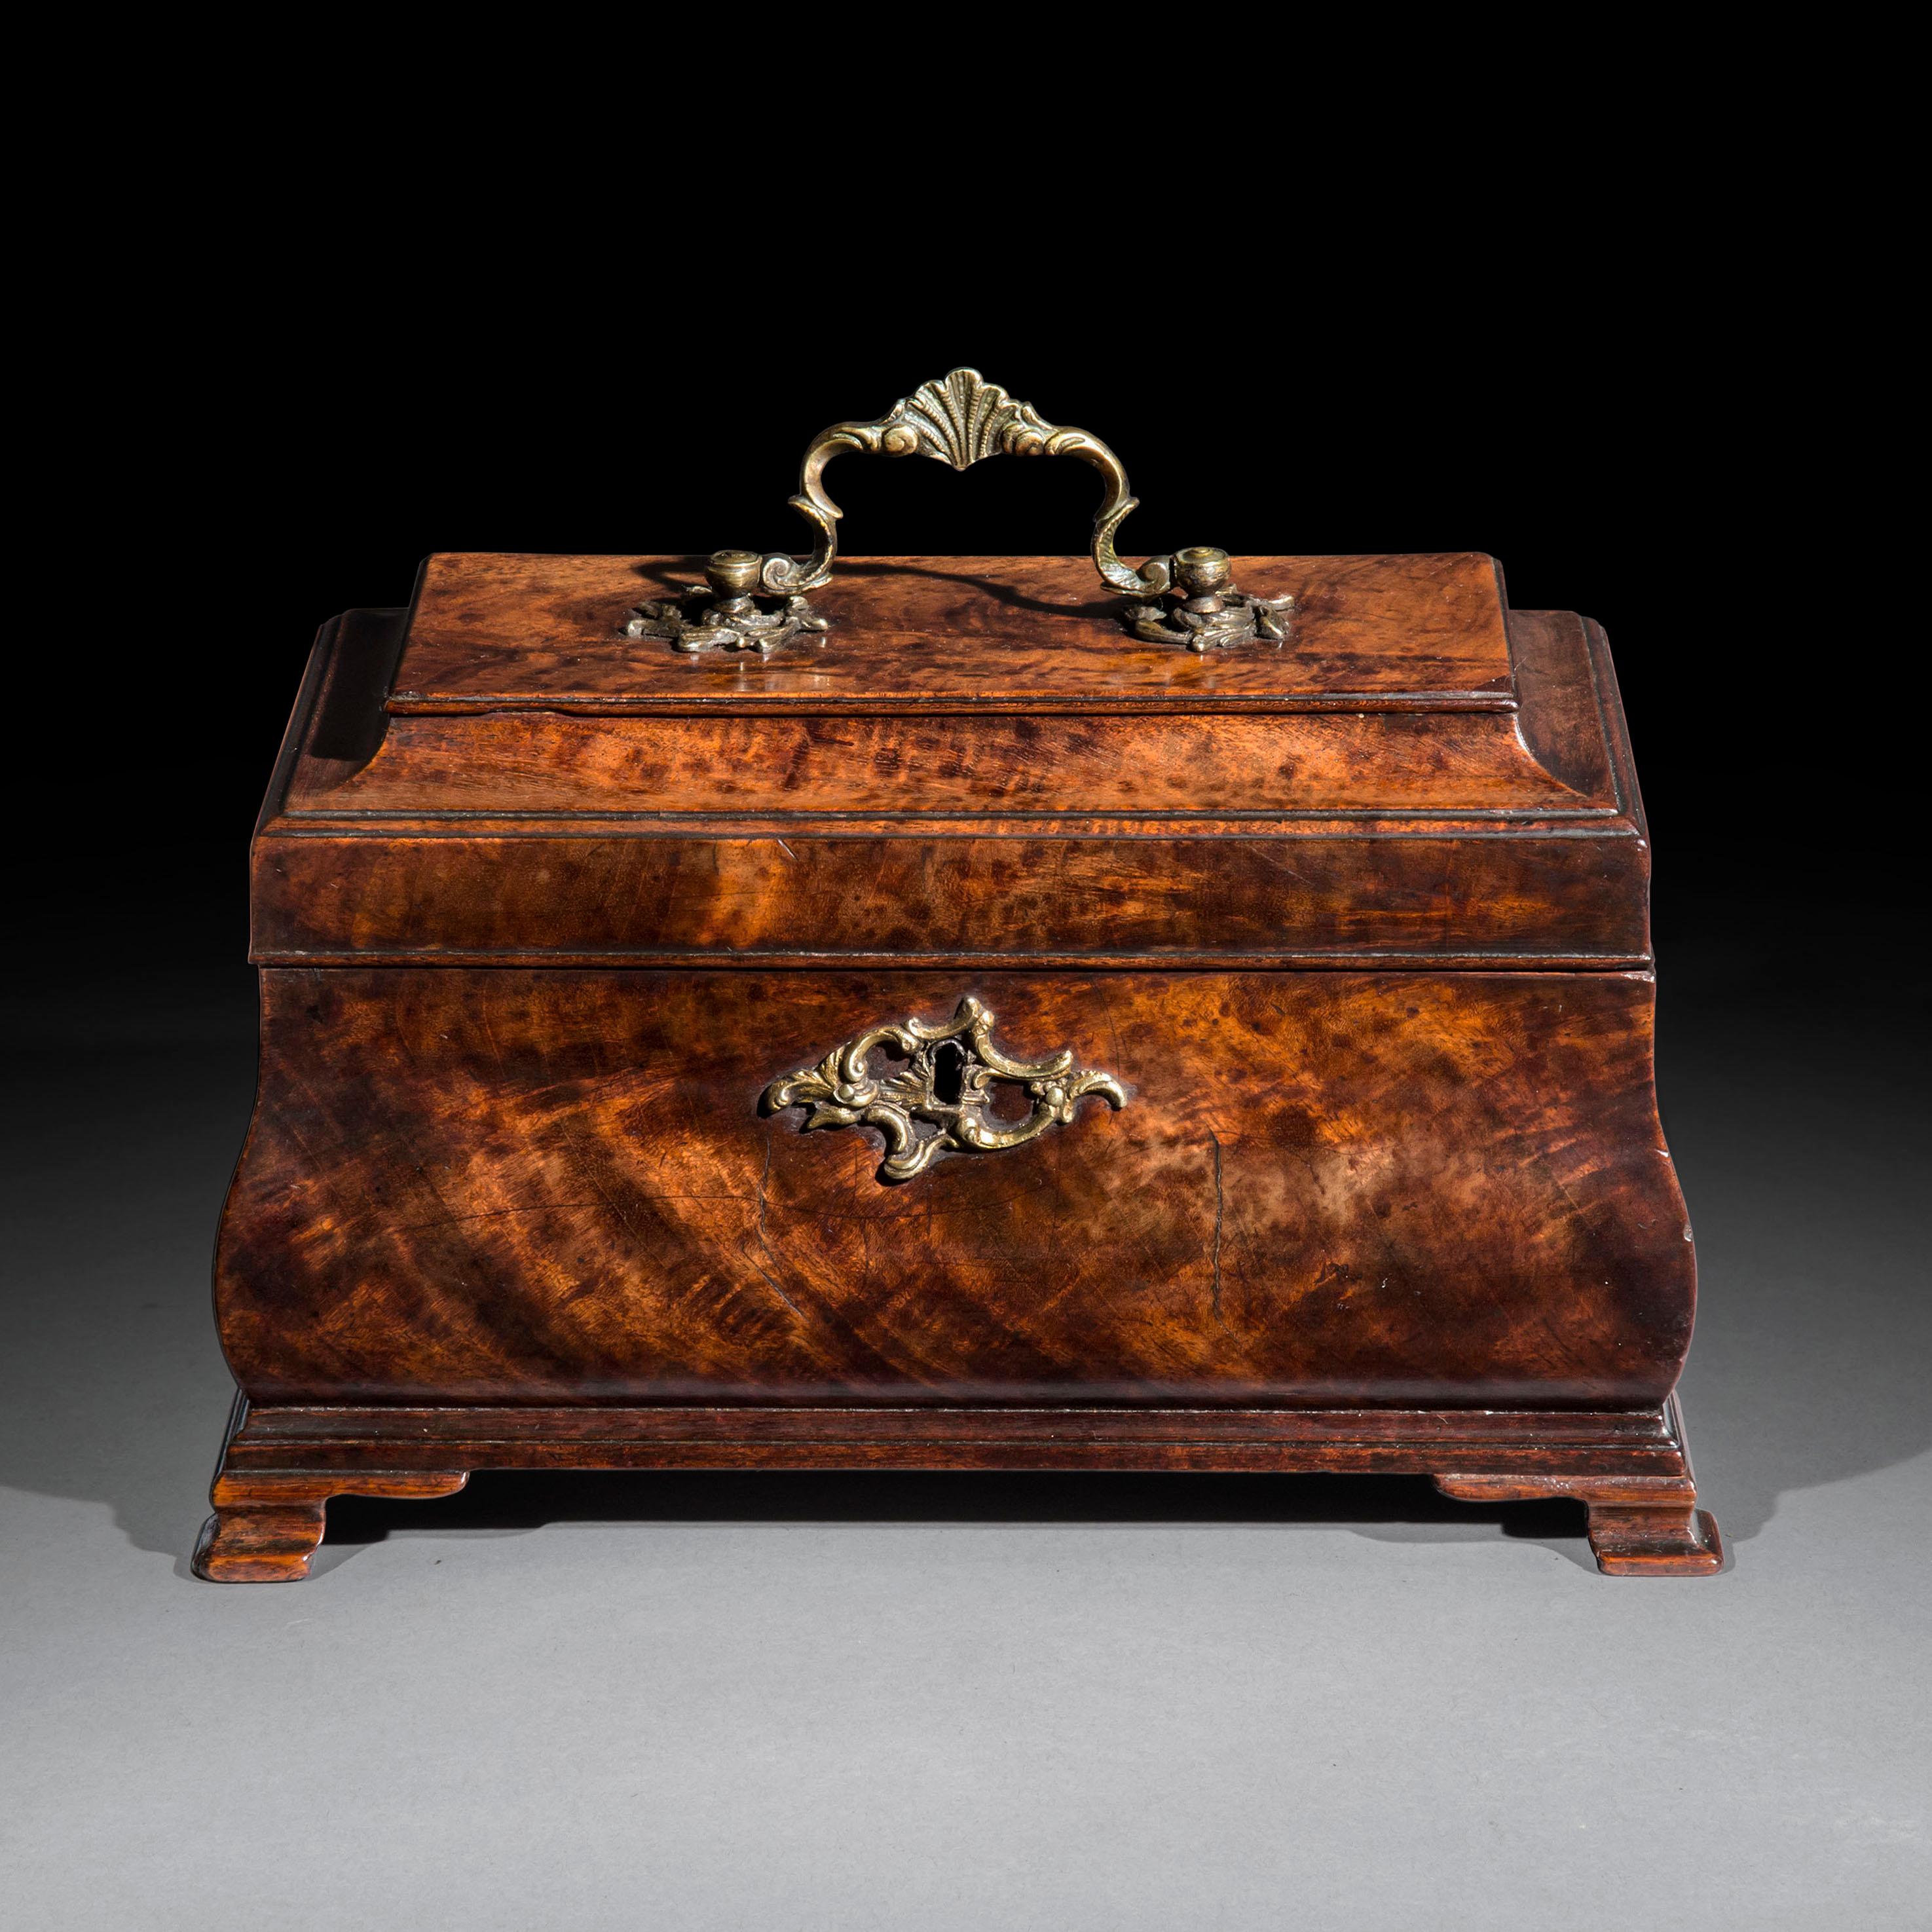 English Pair of Georgian Chippendale Bombé Tea Caddies or Jewelry Boxes